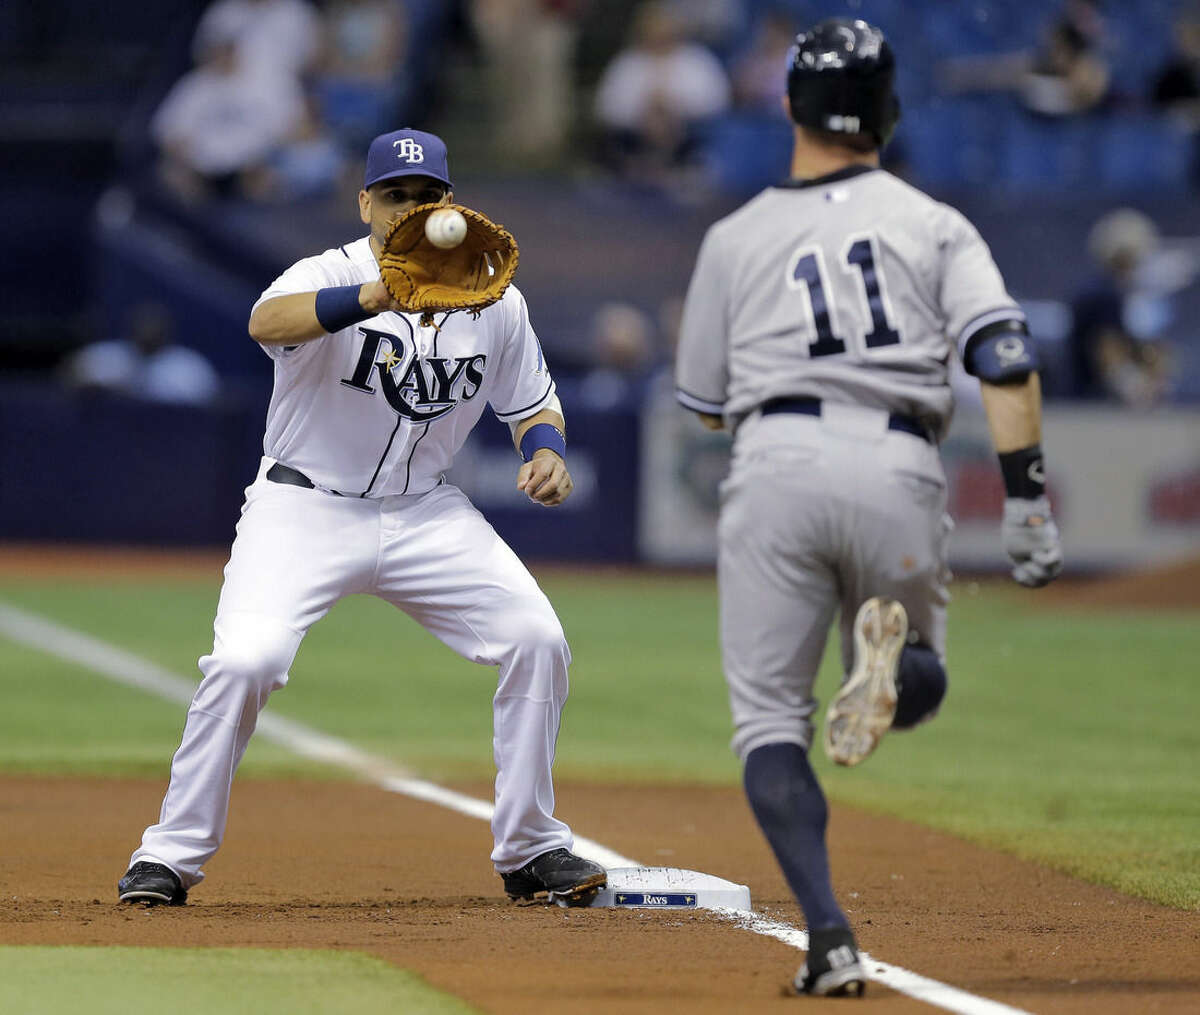 Tampa Bay Rays first baseman James Loney gets the throw from catcher Rene Rivera for the out on New York Yankees' Brett Gardner (11) at first base on a sacrifice bunt during the first inning of a baseball game Thursday, May 14, 2015, in St. Petersburg, Fla. Jacoby Ellsbury advanced to second on the play. (AP Photo/Chris O'Meara)